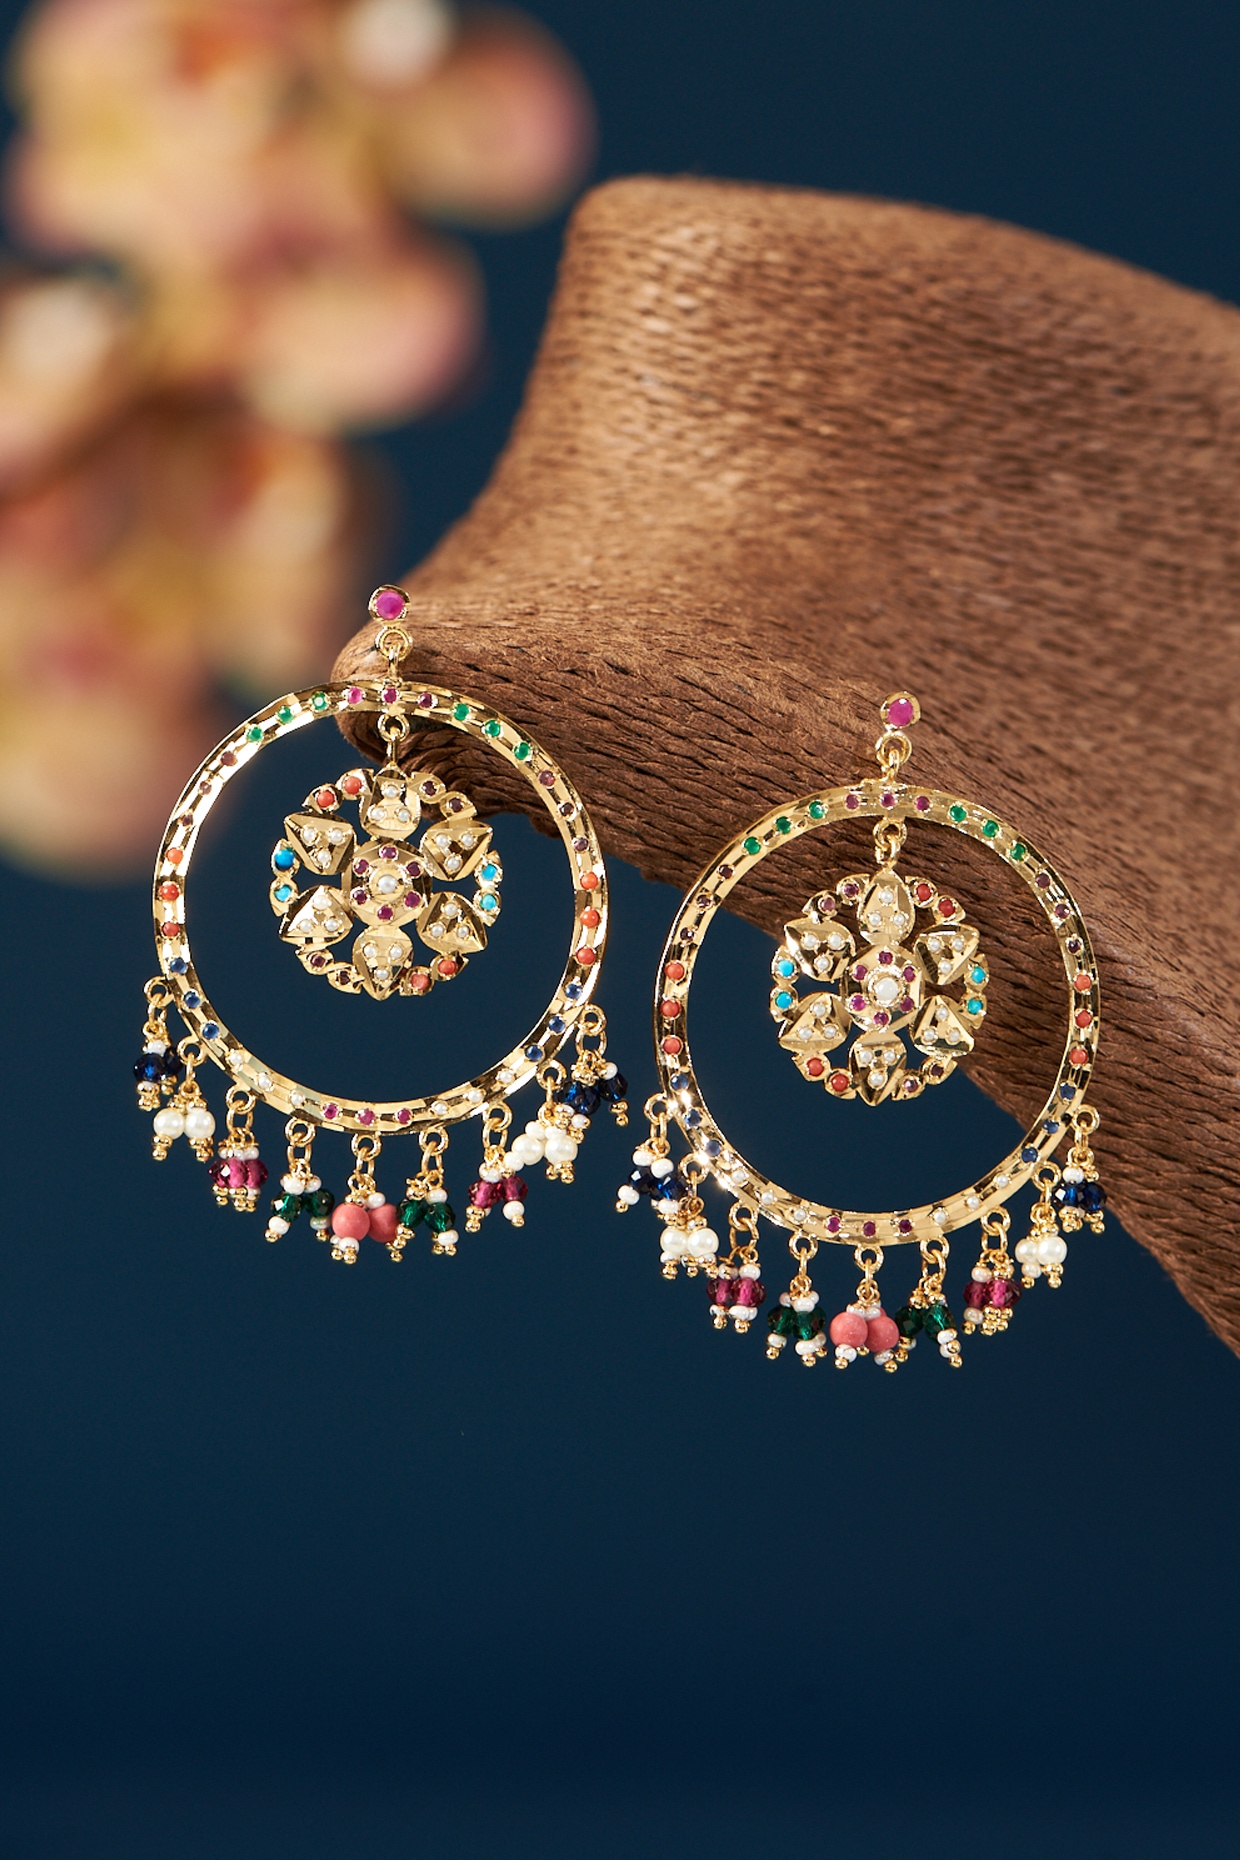 22K Gold Uncut Diamond Chand Bali Earrings With Ruby , Emerald & Japanese  Culture Pearls - 235-DER1055 in 29.000 Grams